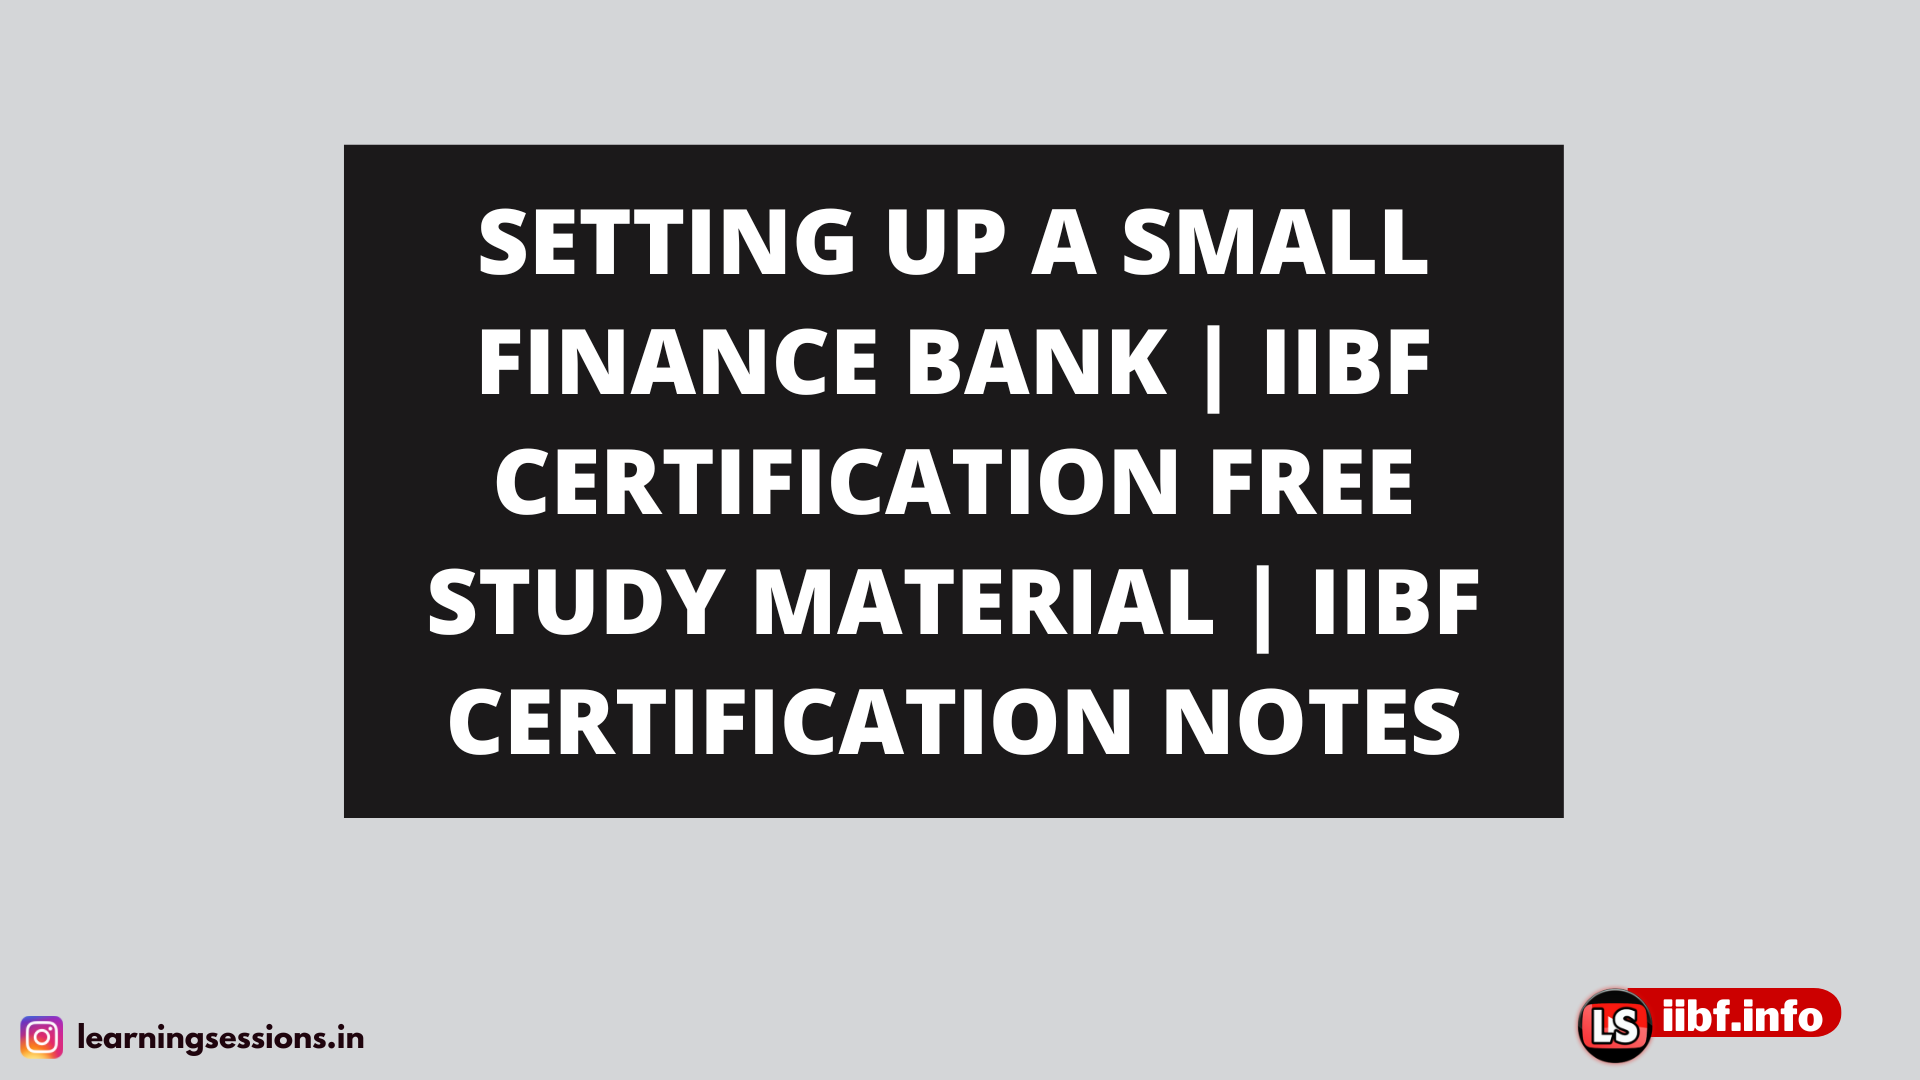 SETTING UP A SMALL FINANCE BANK | IIBF CERTIFICATION FREE STUDY MATERIAL | IIBF CERTIFICATION NOTES